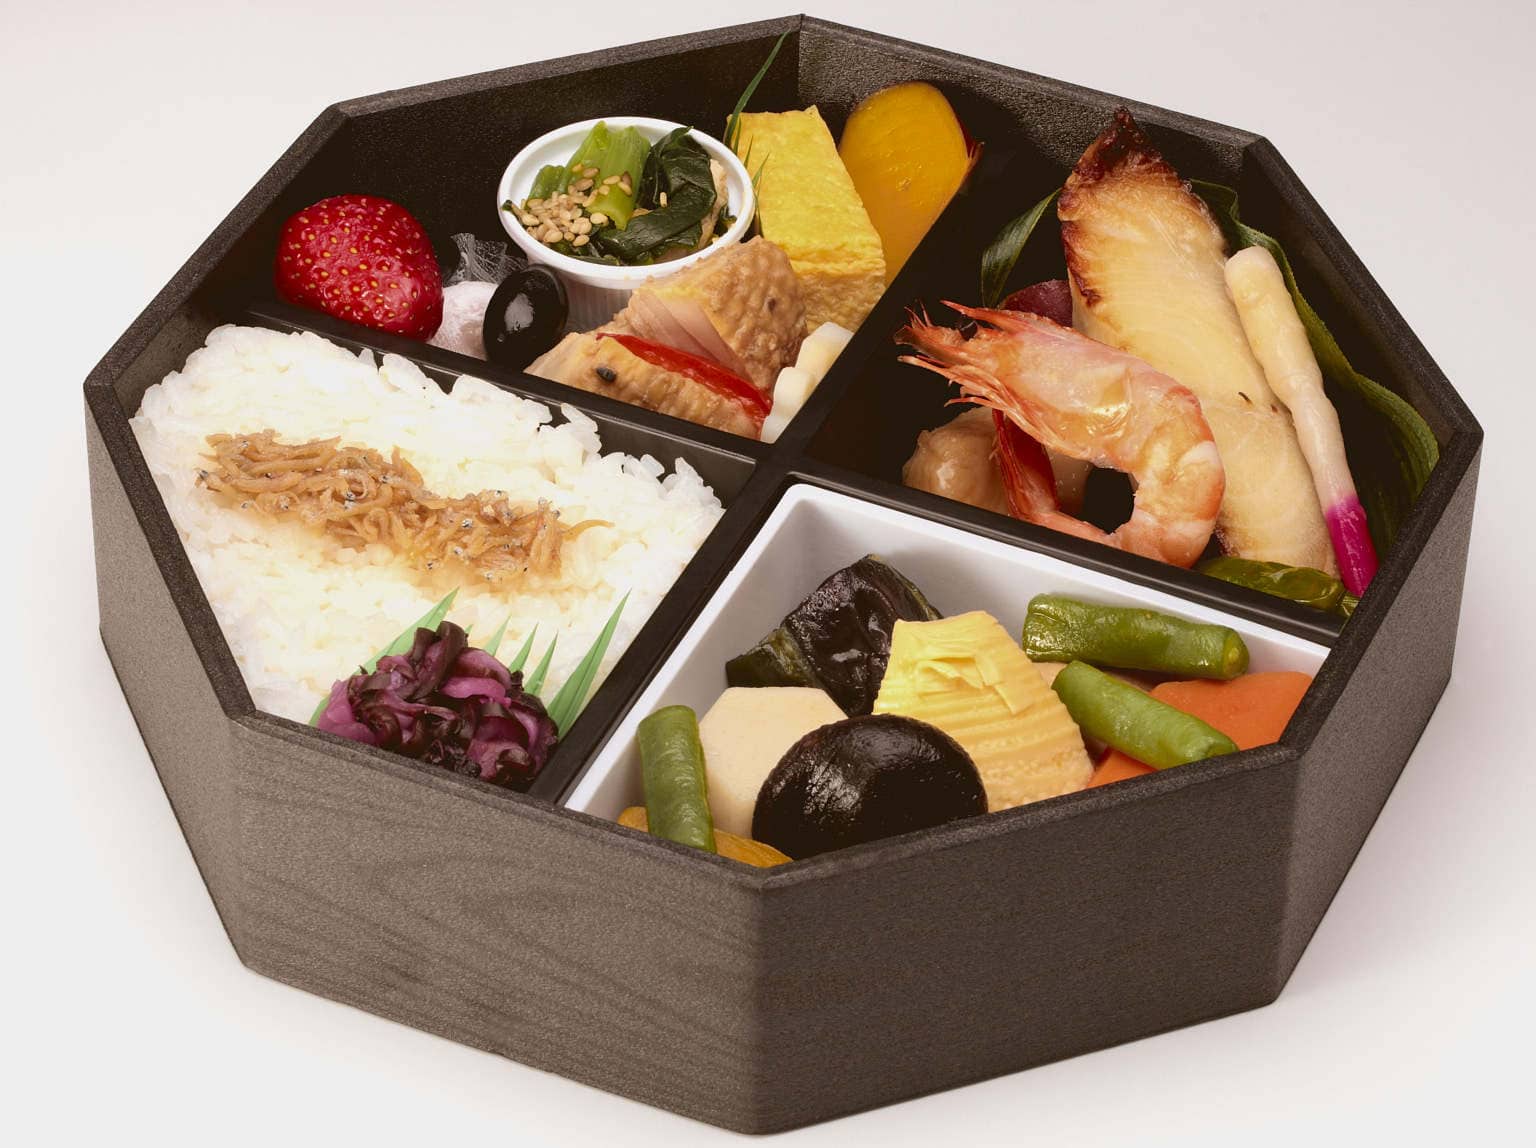 Short article of bento boxes from Japan